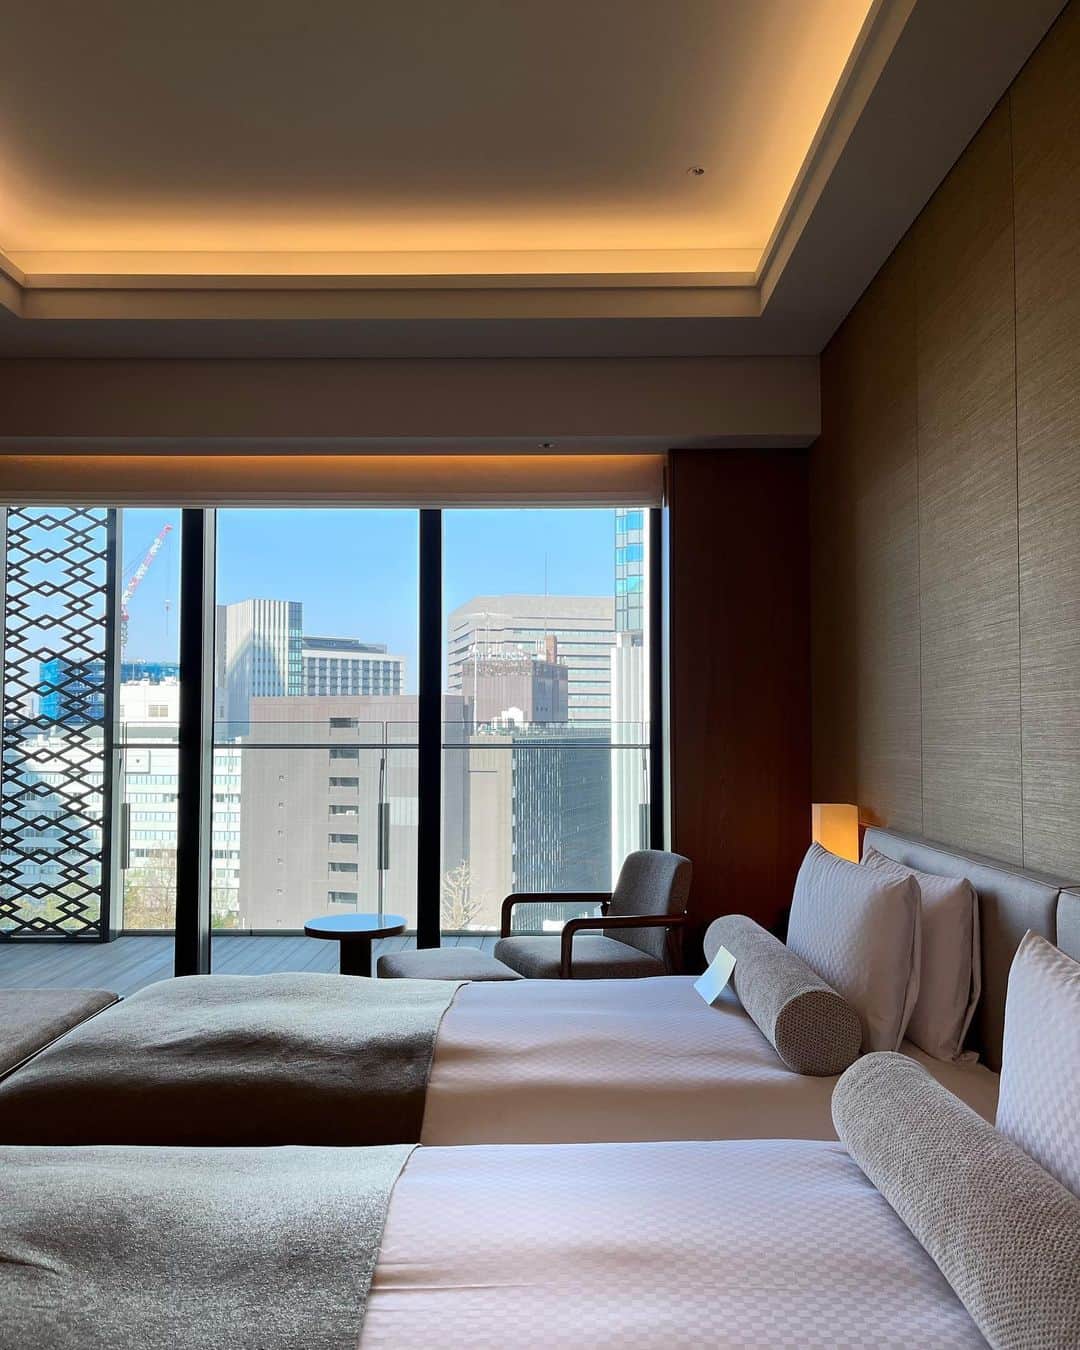 ホテルオークラ東京 Hotel Okura Tokyoさんのインスタグラム写真 - (ホテルオークラ東京 Hotel Okura TokyoInstagram)「Spacious suite with large windows🪟 大きな窓を備えた開放的なスイート☀️  Suite with 120sqm in The Okura Heritage Wing. This serene and spacious suite features a living room bordered on two sides by window-lined walls, as well as a bathroom, equipped with steam sauna and jet bath, placed right beside a picture window. It recommend you to stay in this luxury room and fully enjoy your time at The Okura Tokyo.  120㎡の落ち着きと解放感を備えたヘリテージウイングにあるスイートルーム。 壁2面に広がる大きな窓を備えたリビングルームに、景観を眺める窓を備えた浴室。その浴室には、スチームサウナと浴室床暖房を揃えます。都会の喧騒から離れて静謐な空間でラグジュアリーステイをお愉しみください。  “Heritage Suite” The Okura Heritage Wing 「ヘリテージスイート」 オークラヘリテージウイング  #スイートルーム #ホテルステイ #ステイケーション  #サウナ #サ活  #ビューバス #サウナ付きホテル #バルコニー付きのお部屋  #東京ホテル #ラグジュアリーホテル  #theokuratokyo #オークラ東京  #hotelroom  #suiterooom #staycation #tokyohotel #luxuryhotel #luxurylifestyle #luxuryhome #lhw #uncommontravel #lhwtraveler #东京 #酒店 #도쿄 #호텔 #일본 #ญี่ปุ่น #โตเกียว #โรงแรม」6月11日 11時58分 - theokuratokyo